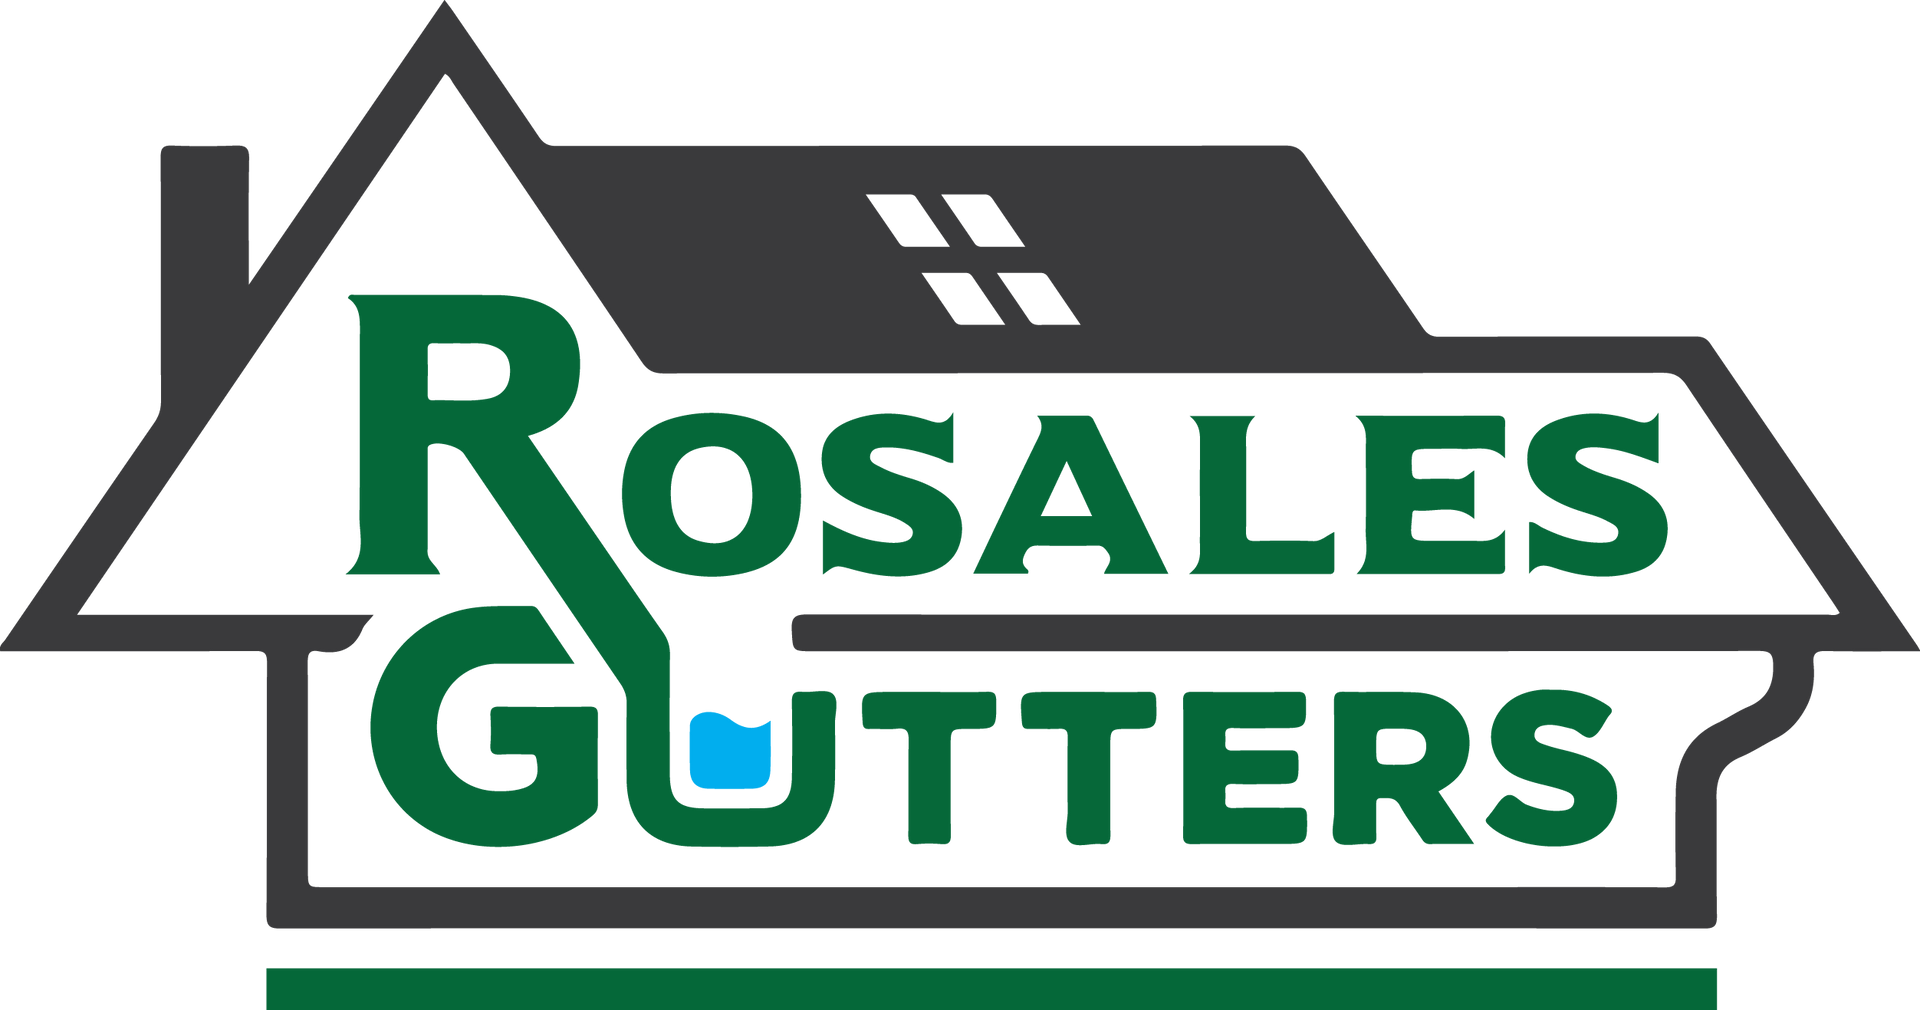 Rosales gutters logo in green, black and white